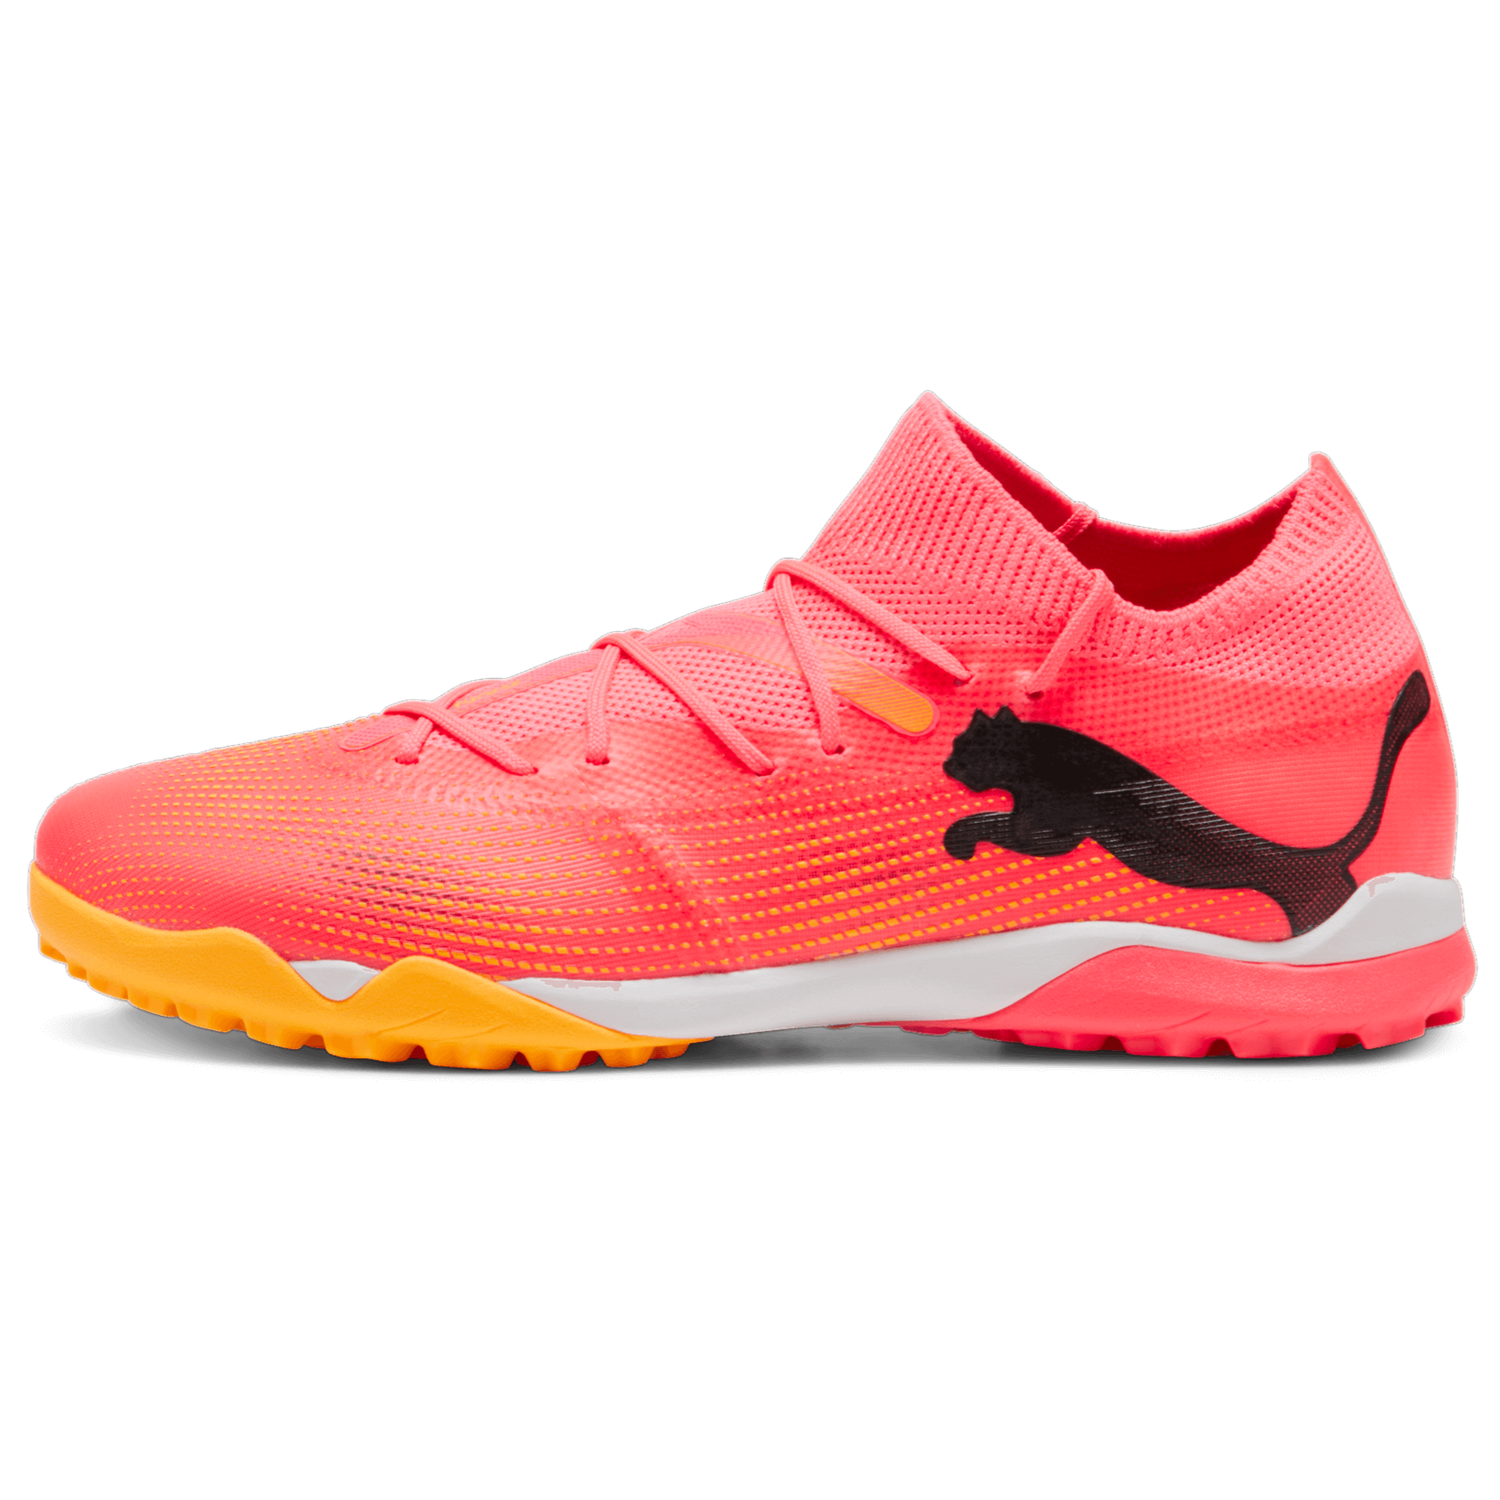 Puma Future 7 Match Turf - Forever Faster Pack (SP24) (Side 1)